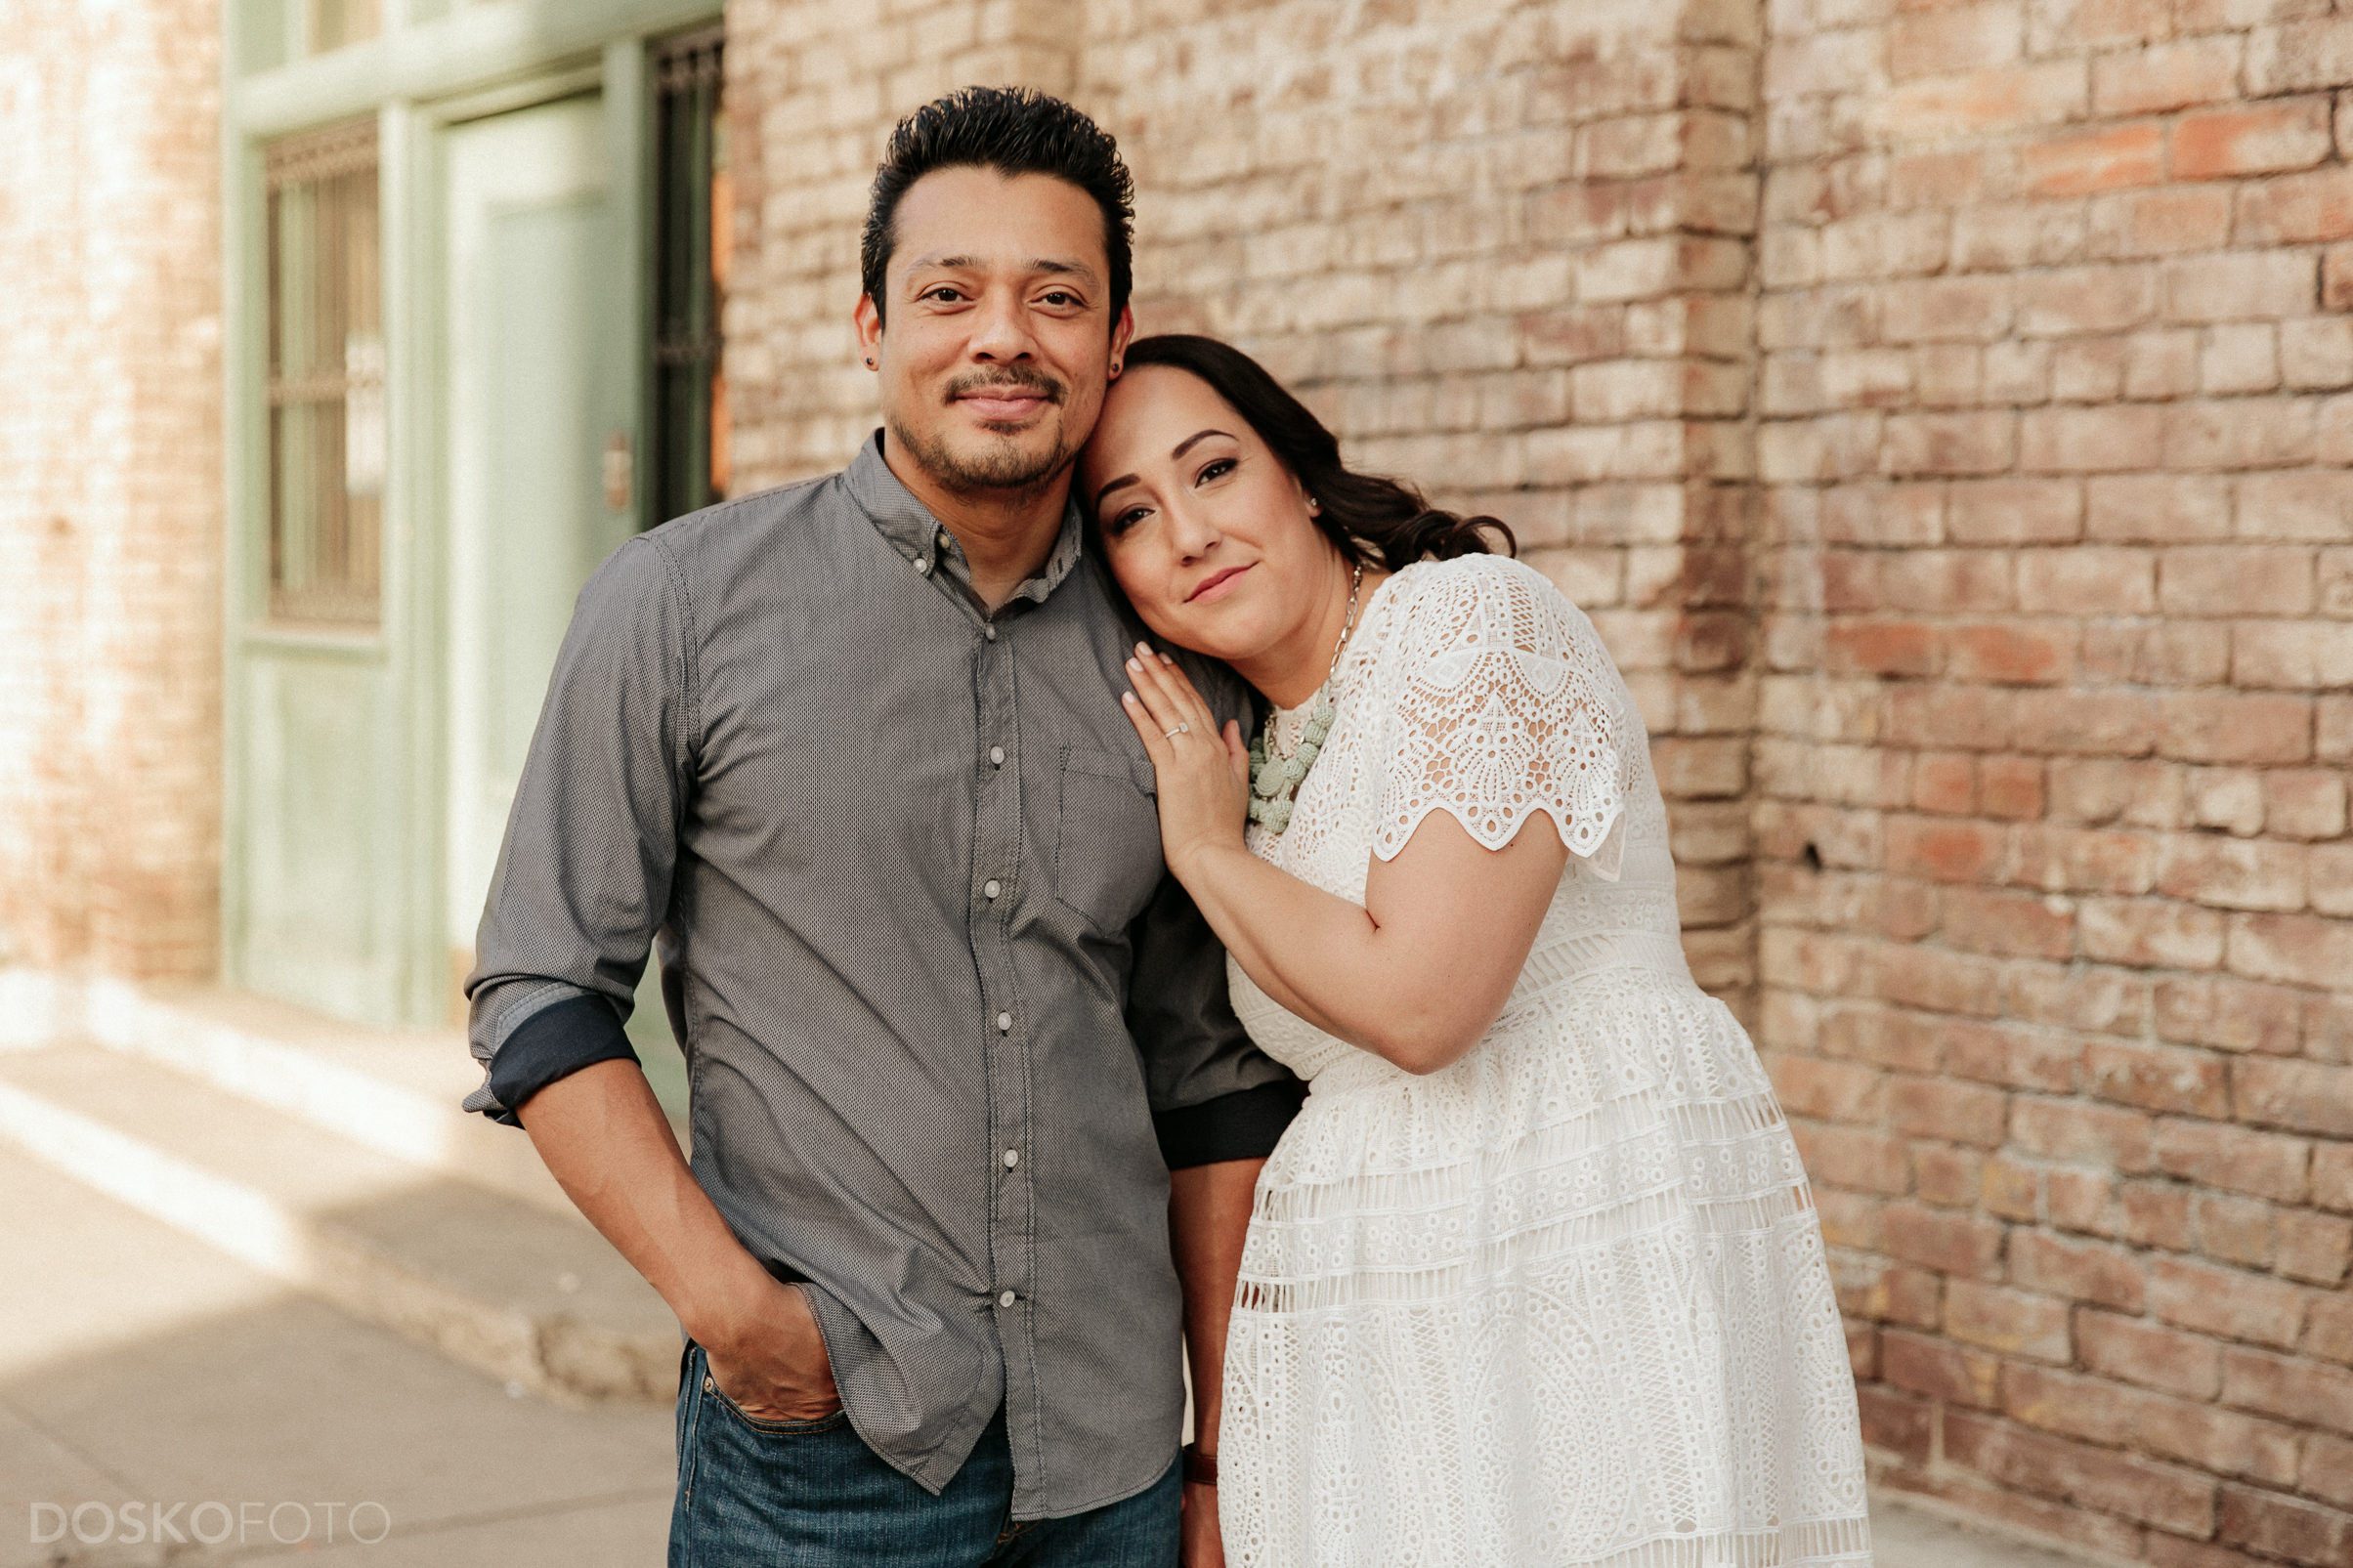 Amanda Doskocil (DOSKOFOTO), a Long Beach Wedding Photographer, travels downtown with Luis and Suzanne for an urban Los Angeles engagement photoshoot at the Nate Starkman &amp; Son building.